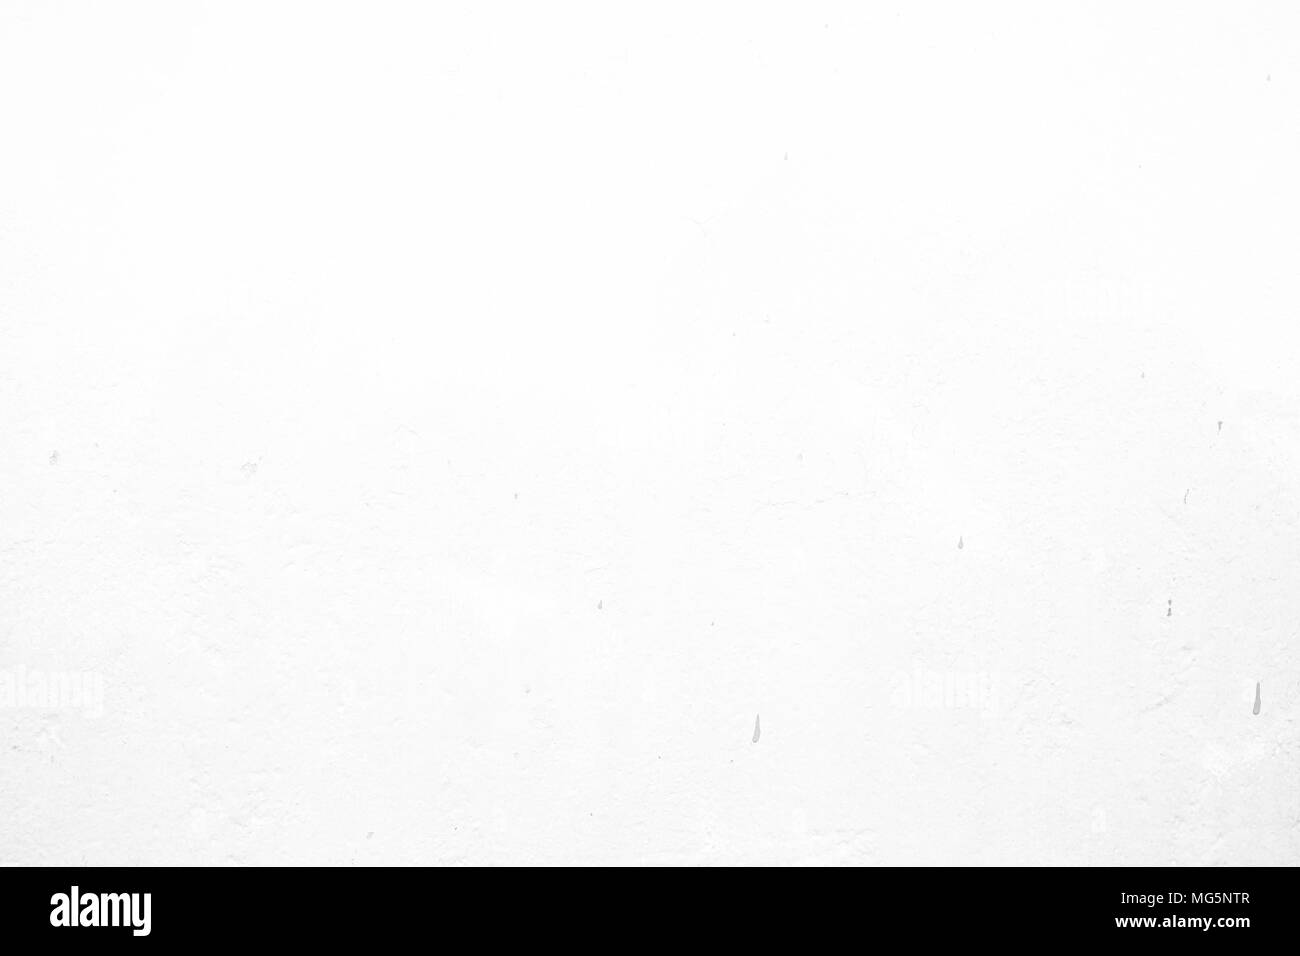 White Grunge Concrete Wall Texture Background, Suitable for Presentation, Web Temple, Backdrop, and Scrapbook Making. Stock Photo